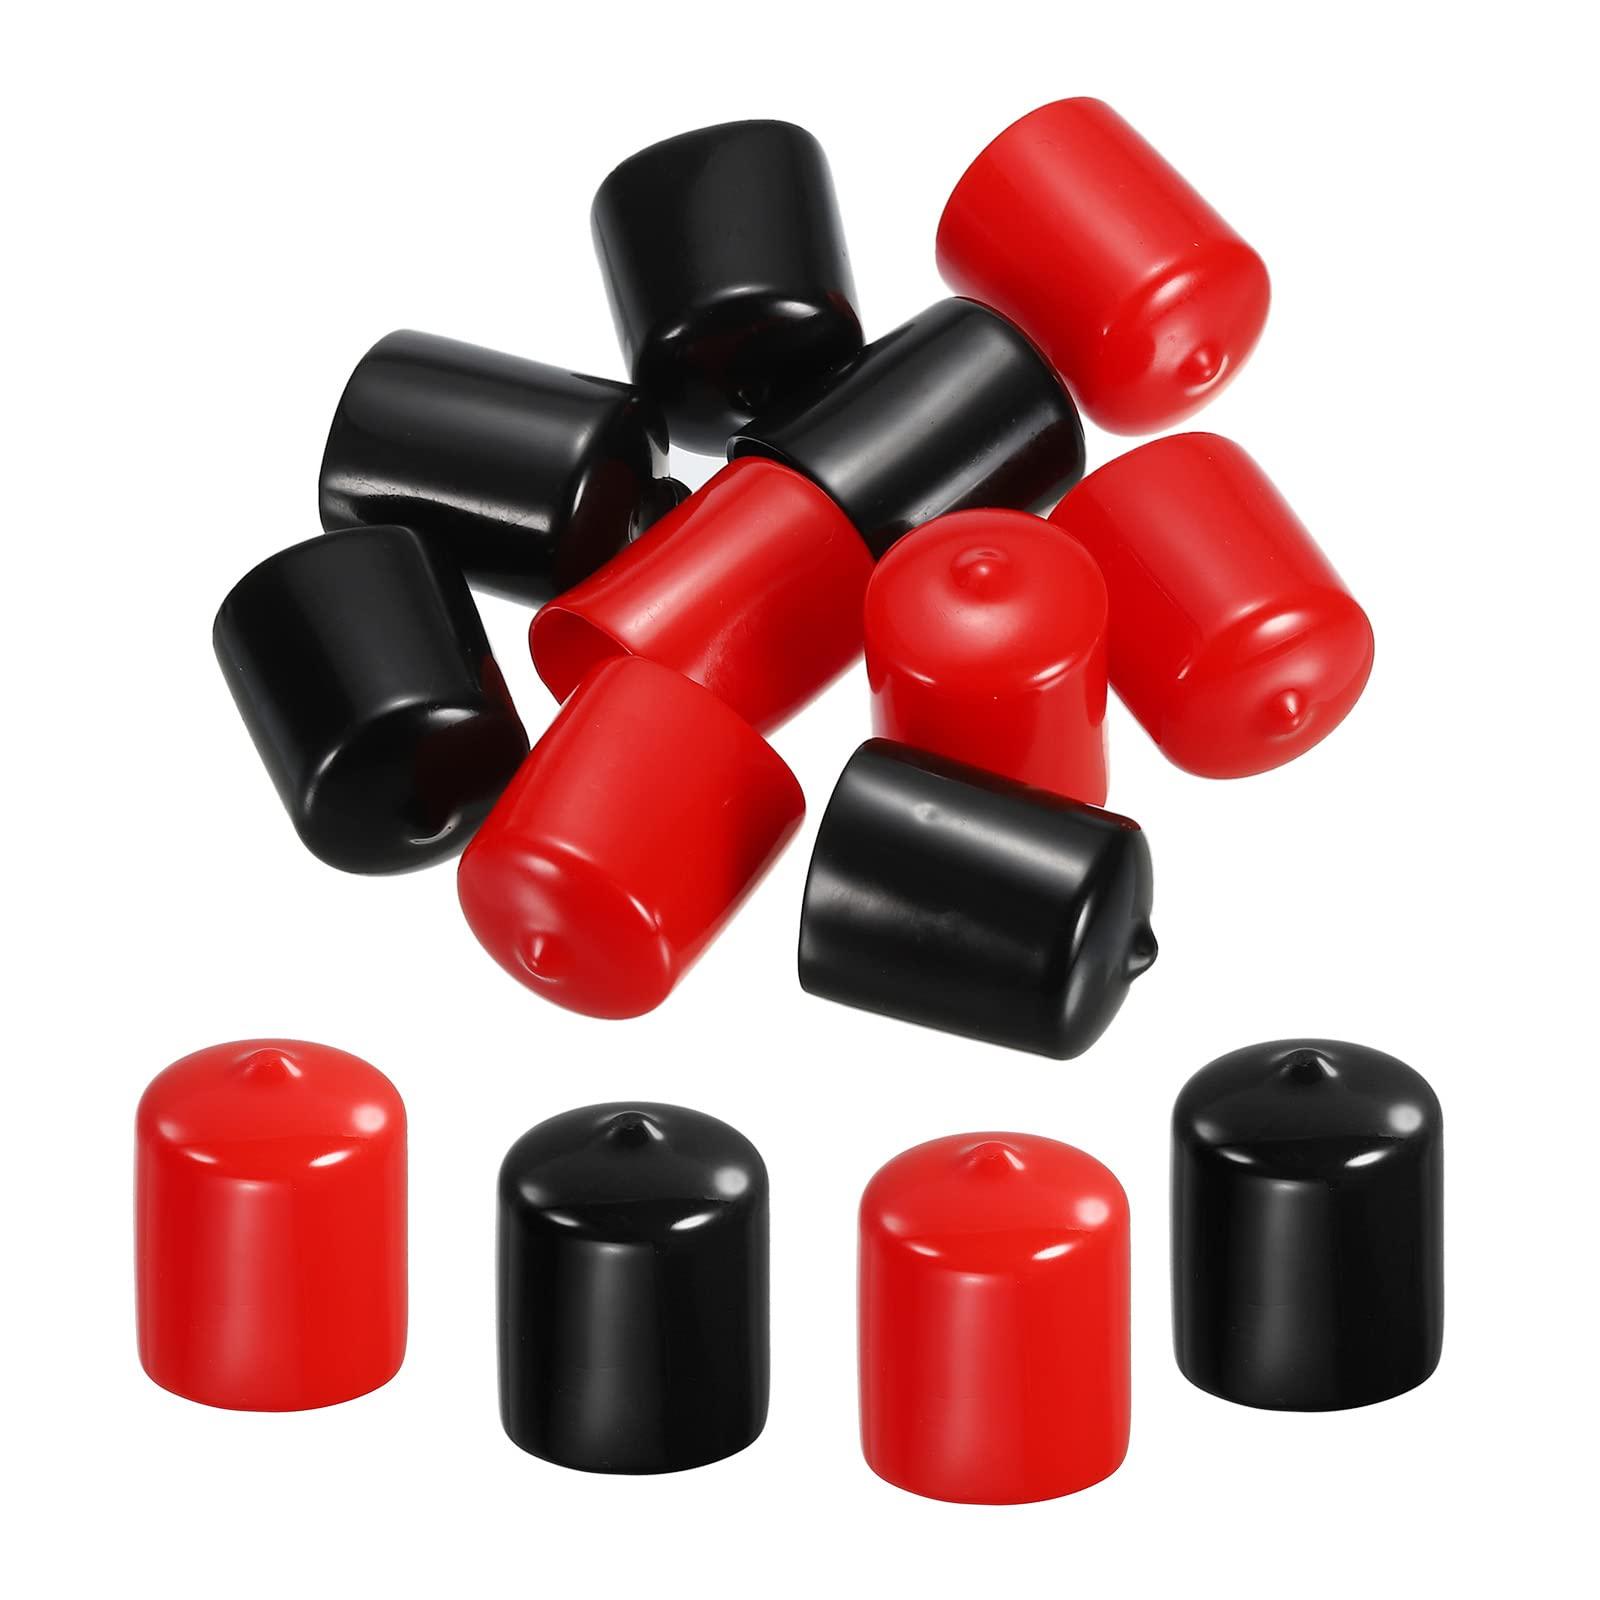 sourcing map 10pcs Rubber End Caps Cover Assortment 26mm PVC Vinyl Screw Thread Protector for Screw Bolt, Black Red